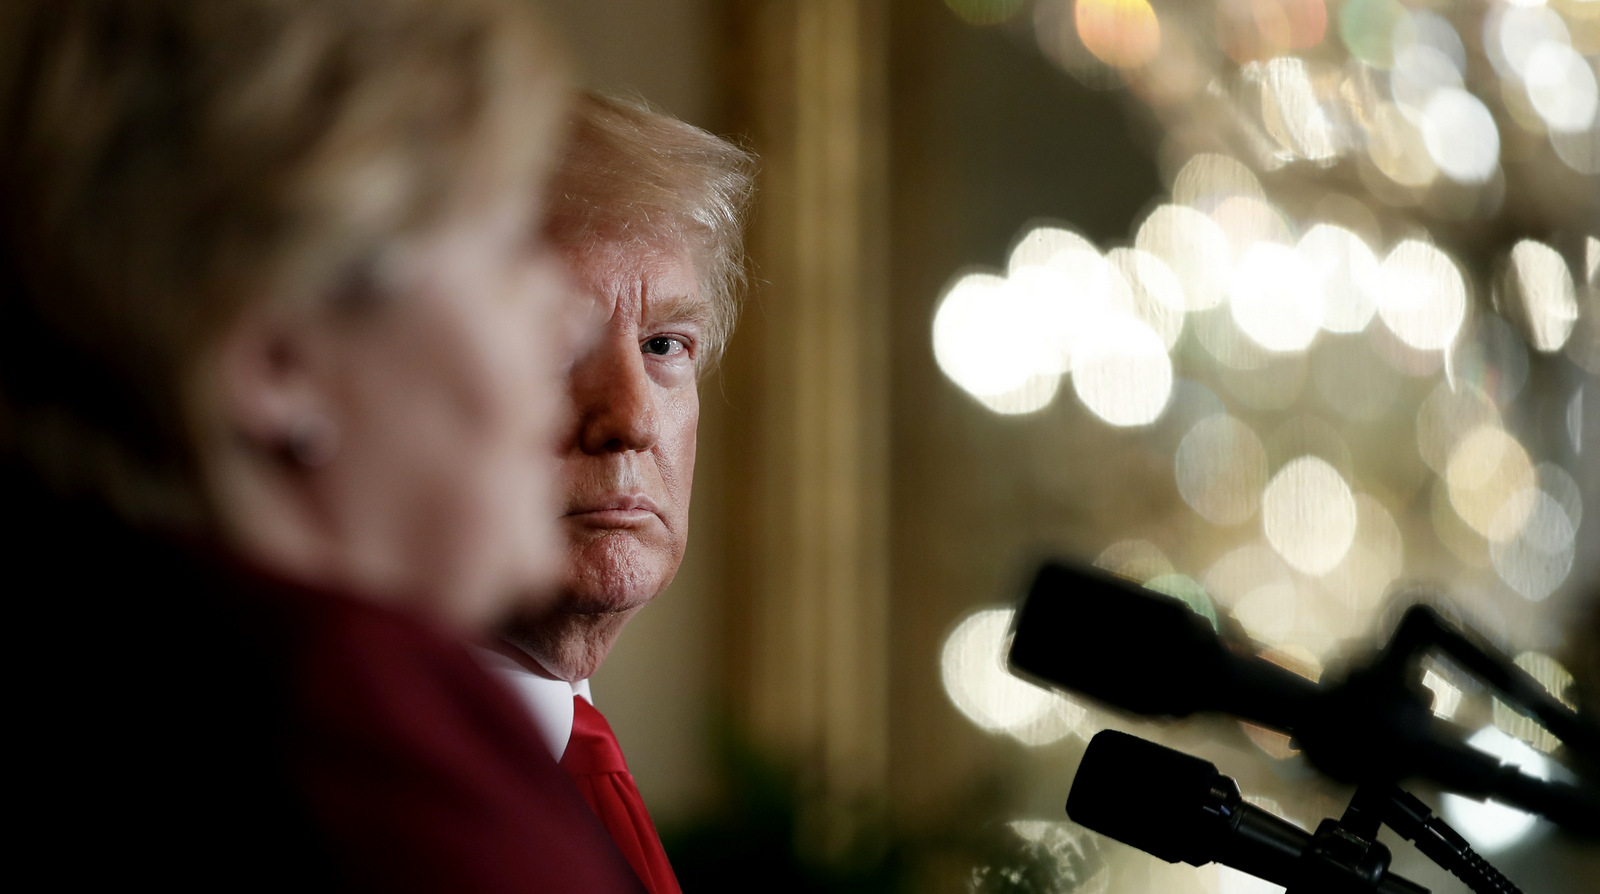 President Donald Trump looks towards Norway's Prime Minister Erna Solberg as she speaks during a news conference in the East Room of the White House, Jan. 10, 2018. (AP/Carolyn Kaster)